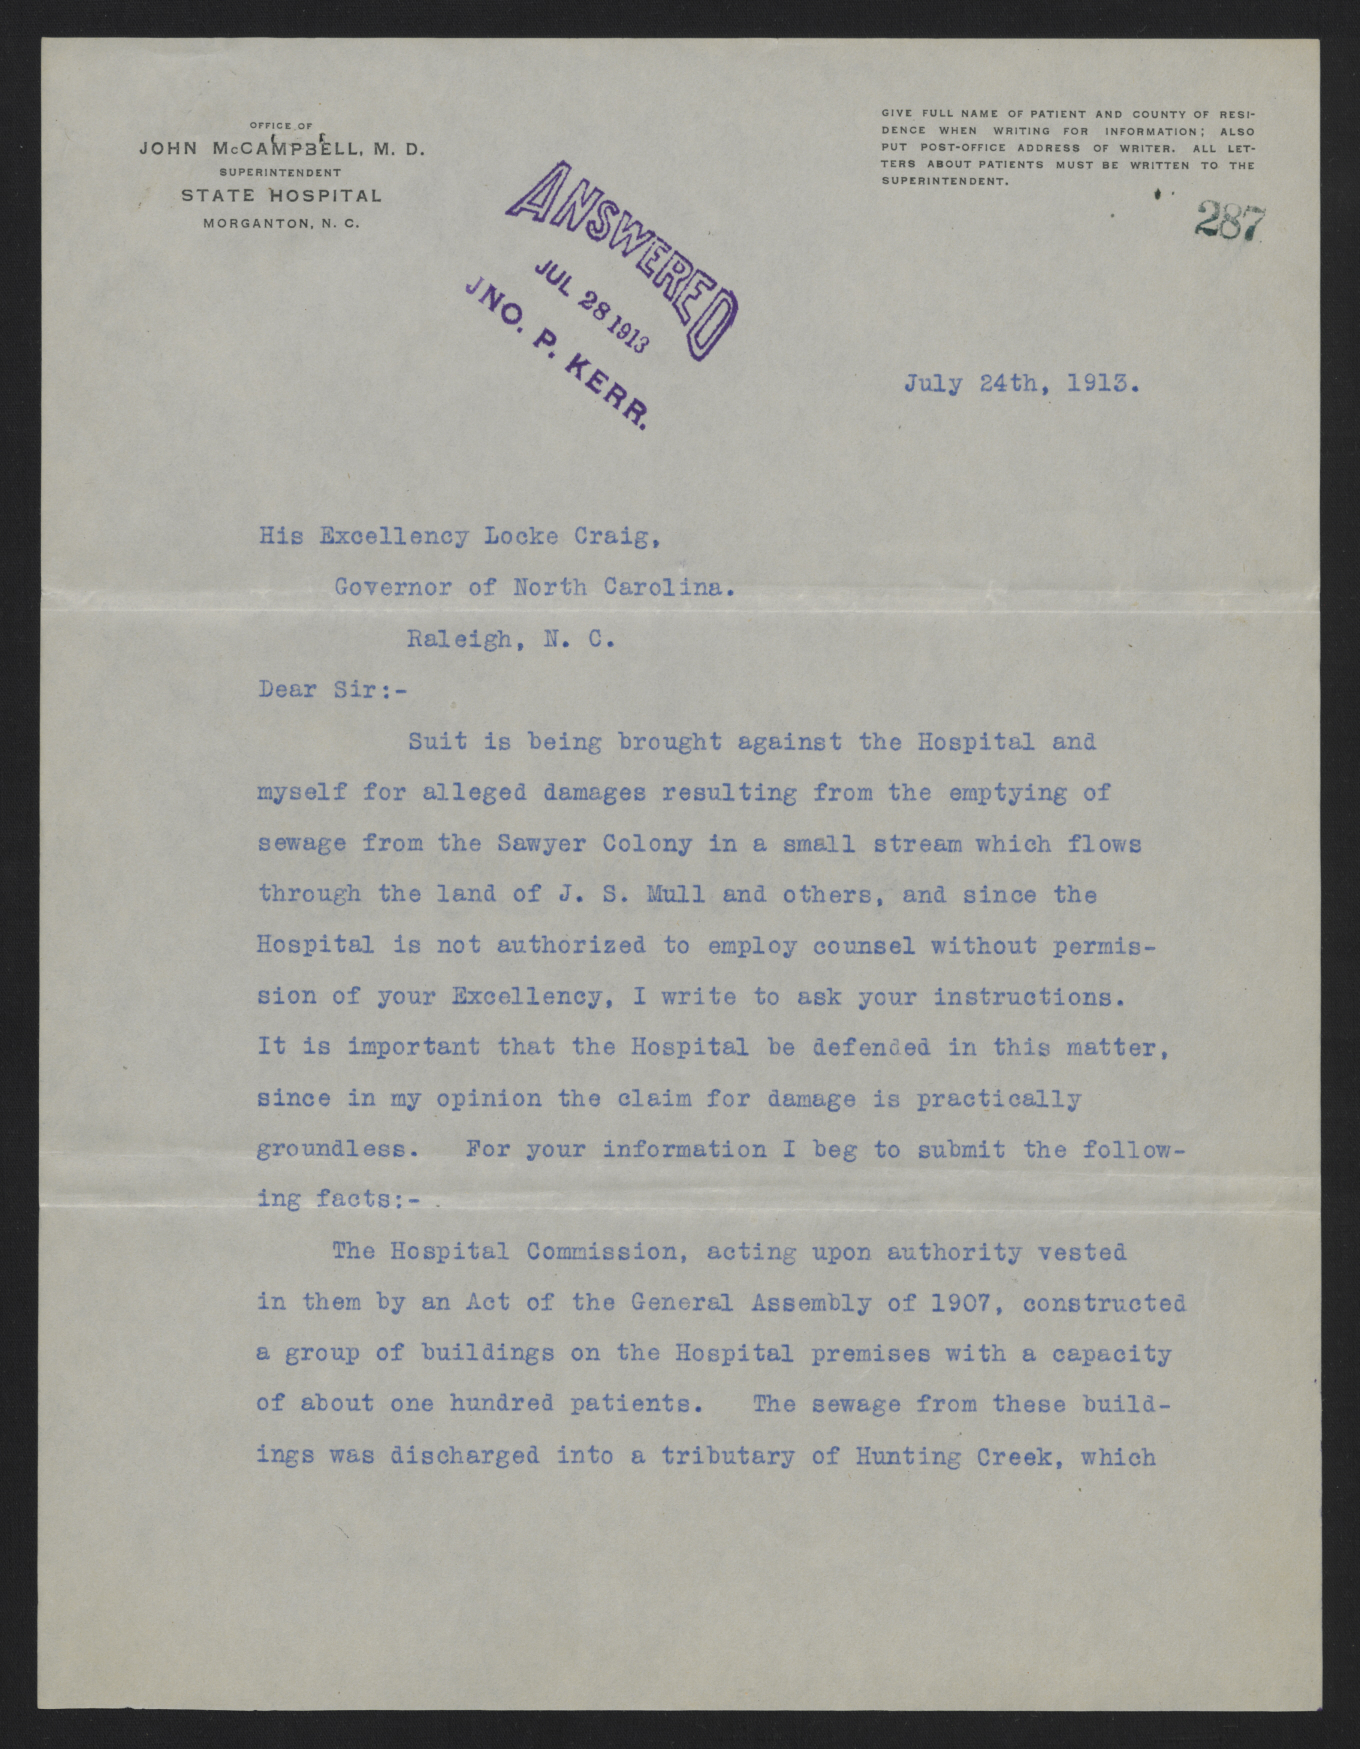 Letter from McCampbell to Craig, July 24, 1913, page 1